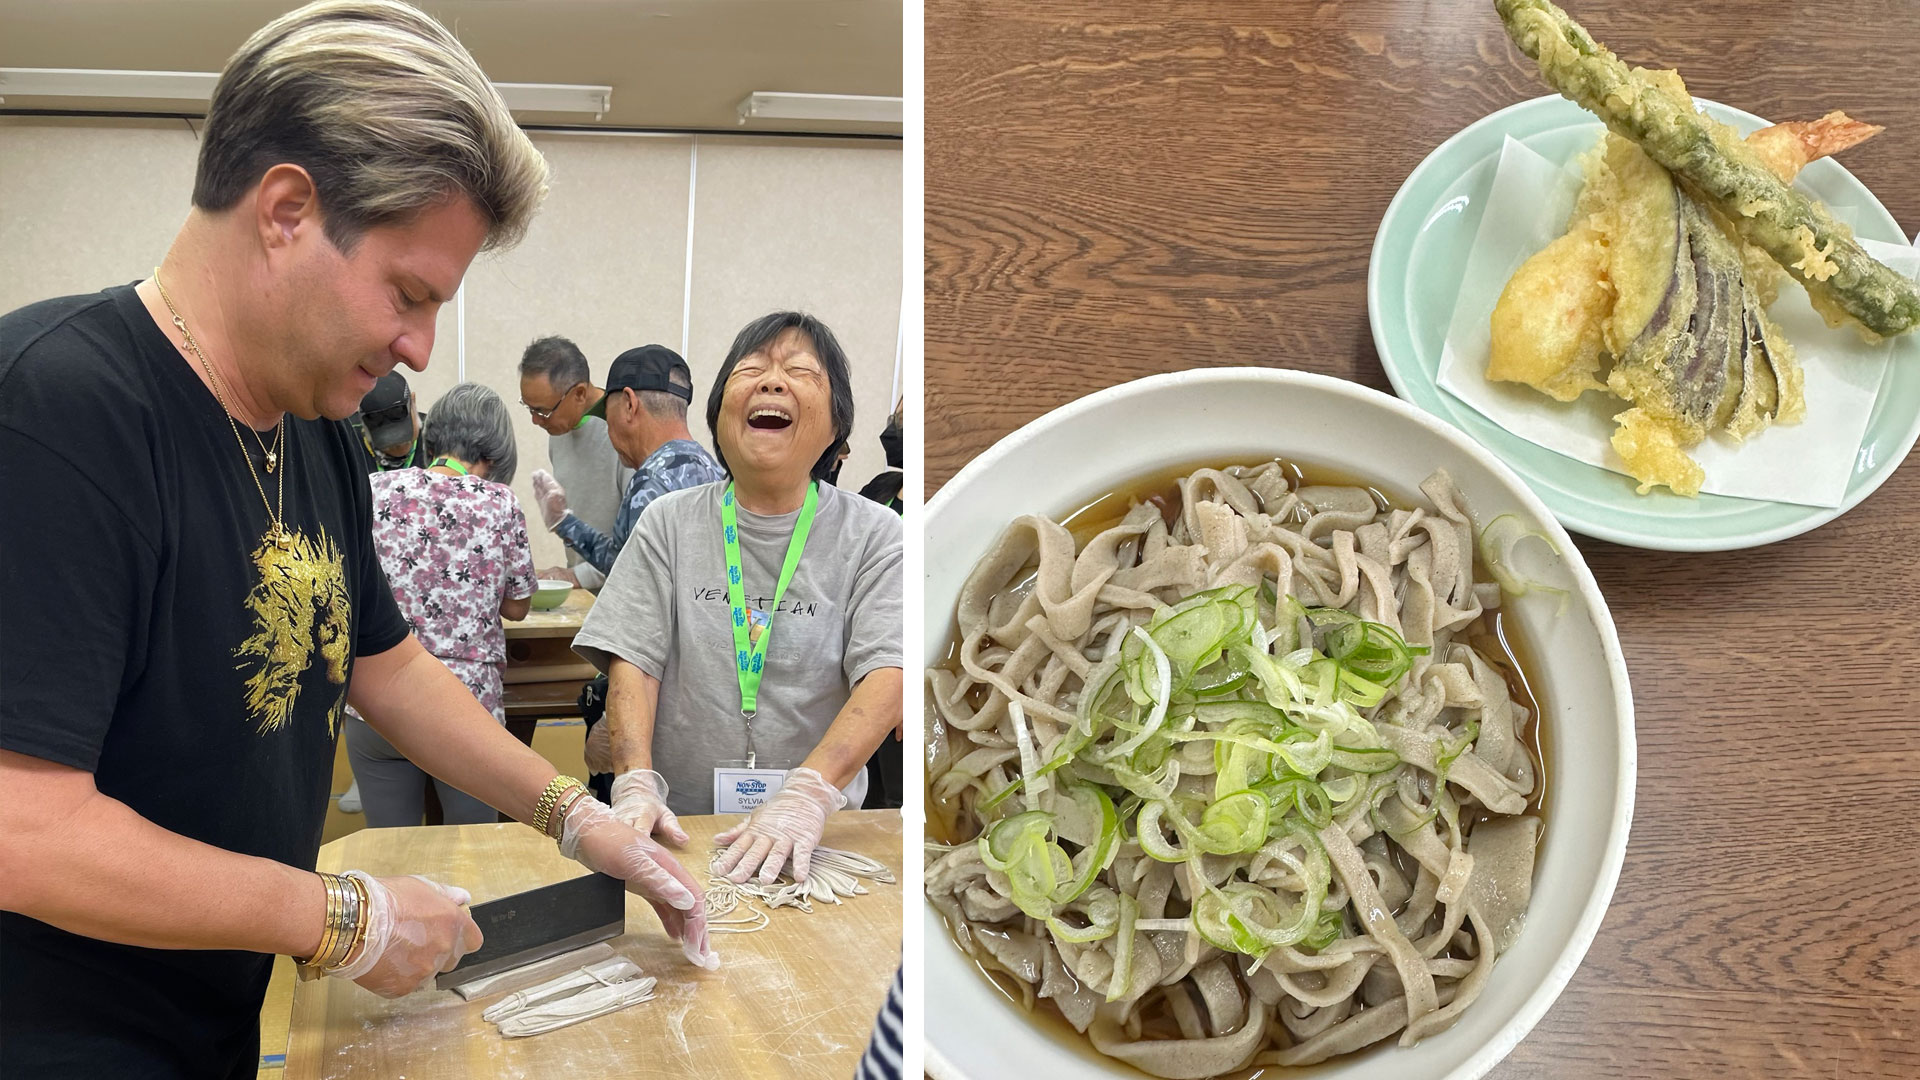 Michael and fellow tour member Sylvia, participating in our hands-on activity of making fresh soba noodles!